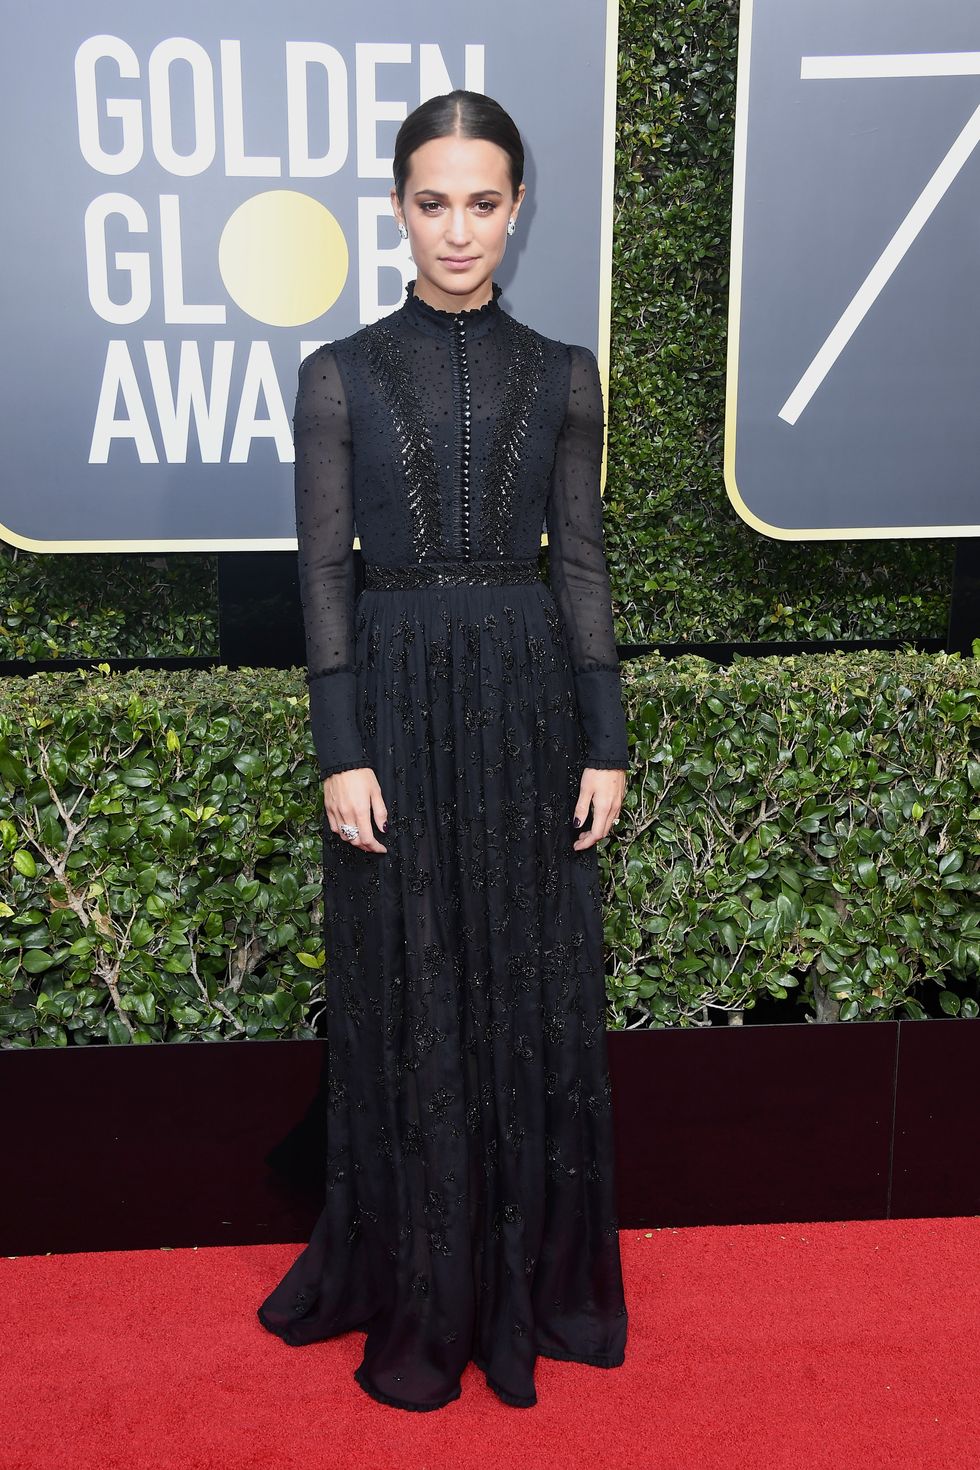 Alicia Vikander in Louis Vuitton at the golden globes